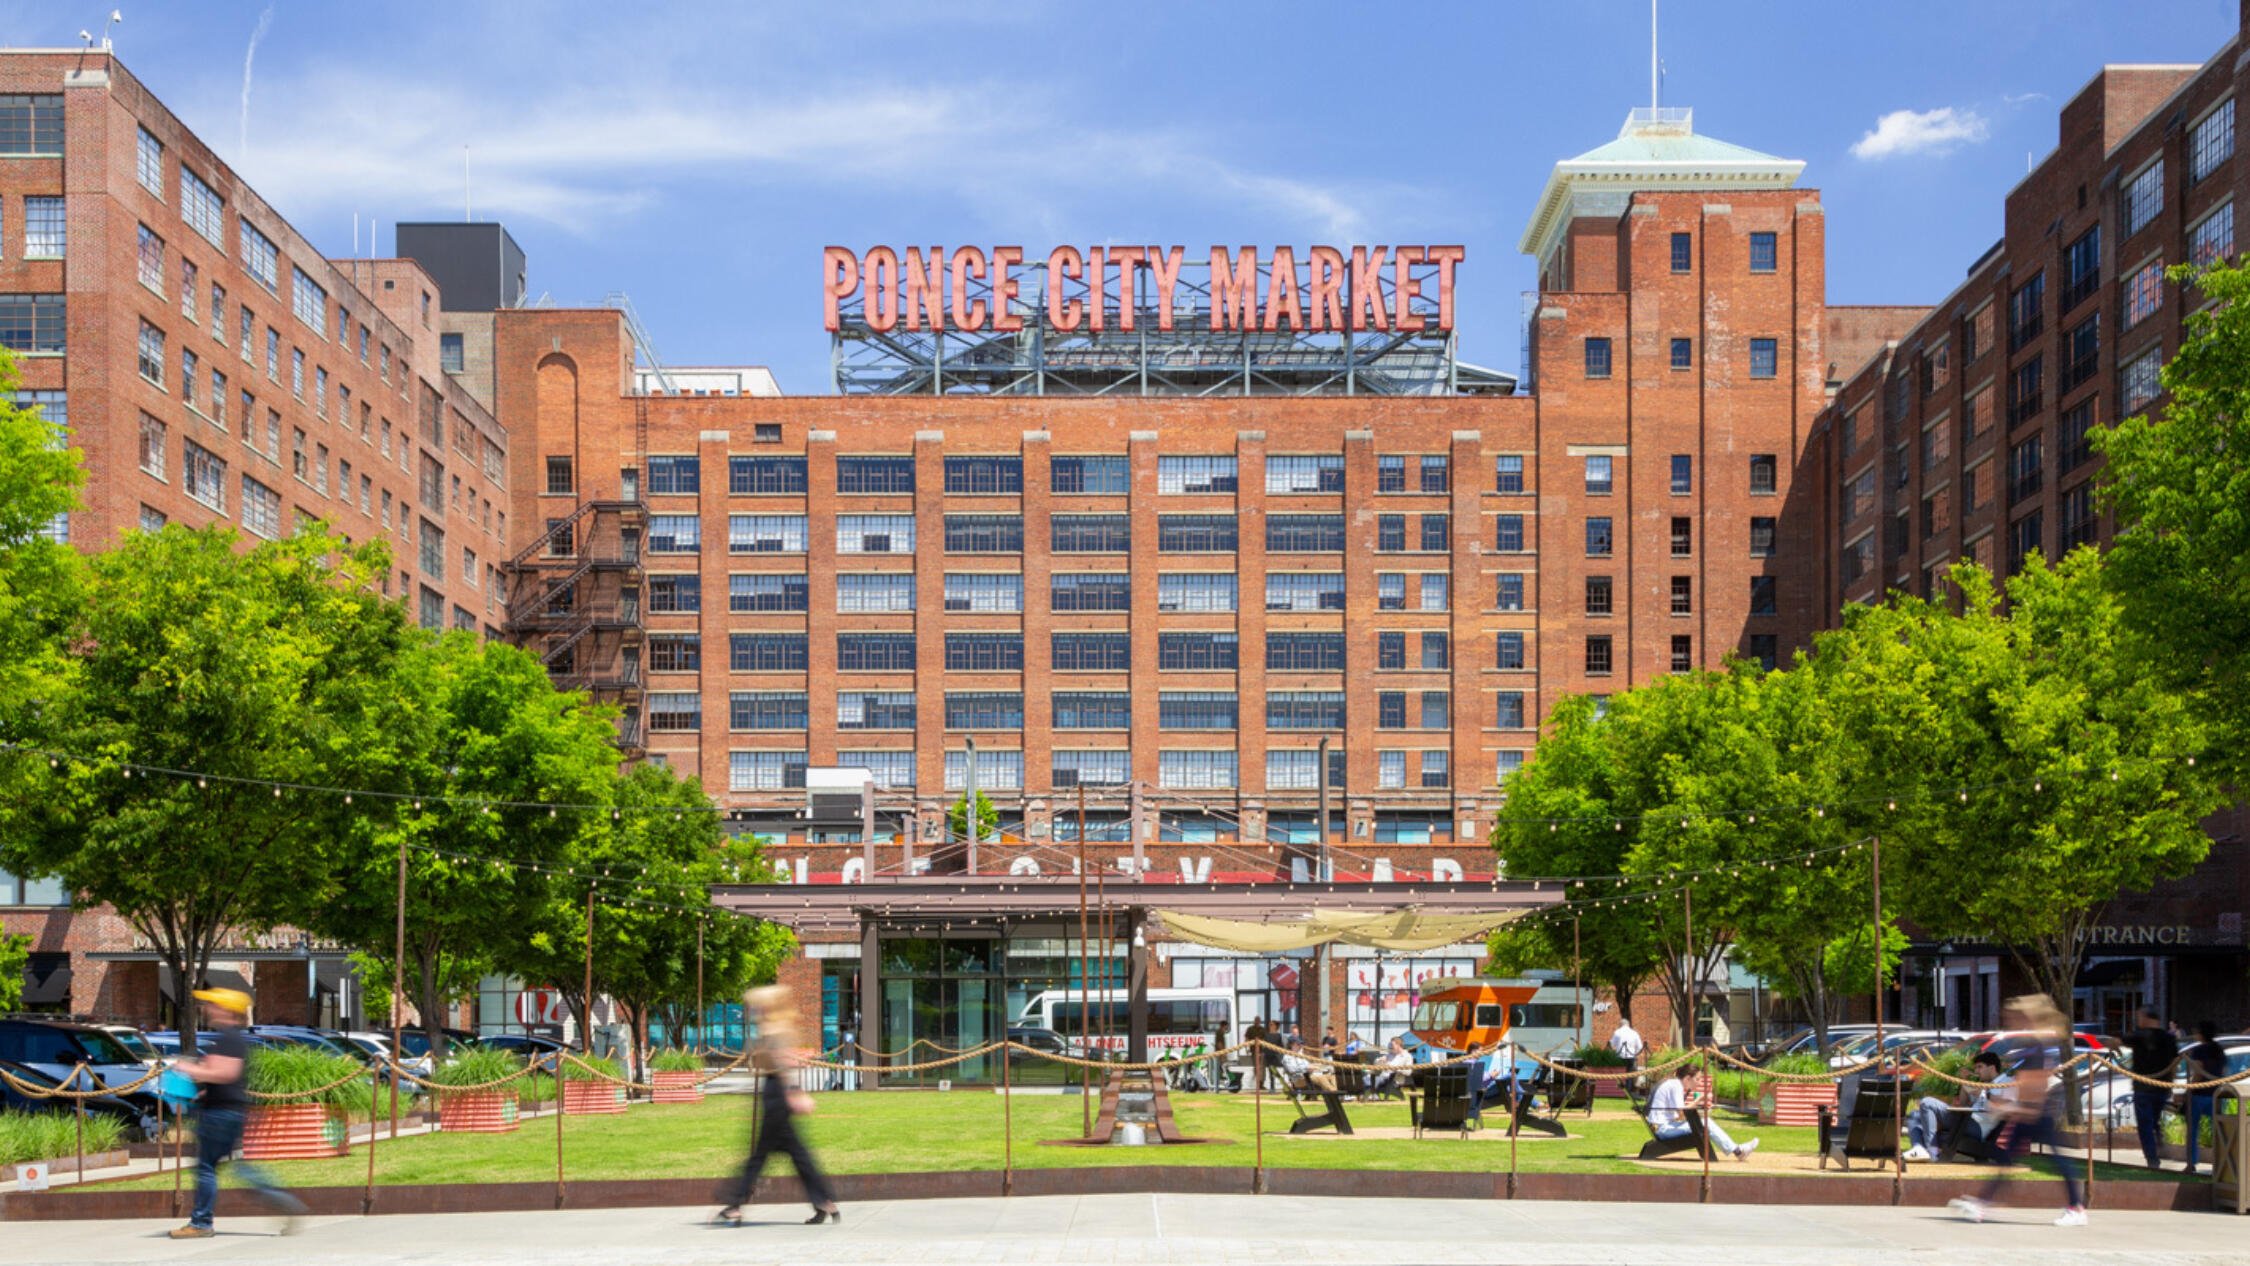 Ponce City Market's exterior façade with visitors in foreground